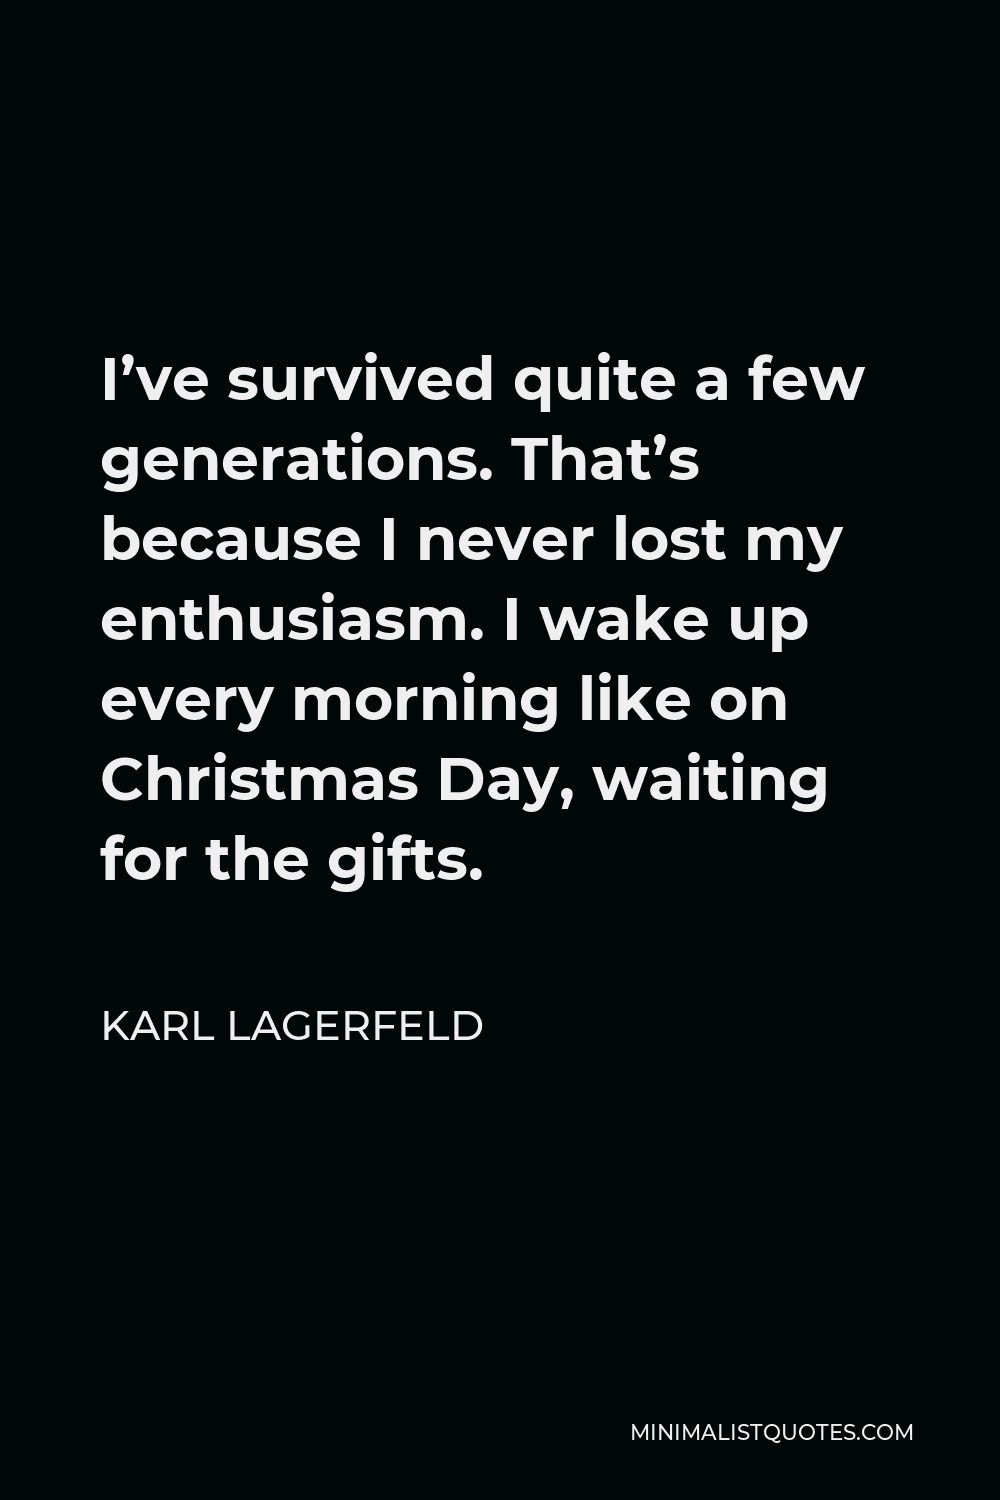 Karl Lagerfeld Quote - I’ve survived quite a few generations. That’s because I never lost my enthusiasm. I wake up every morning like on Christmas Day, waiting for the gifts.